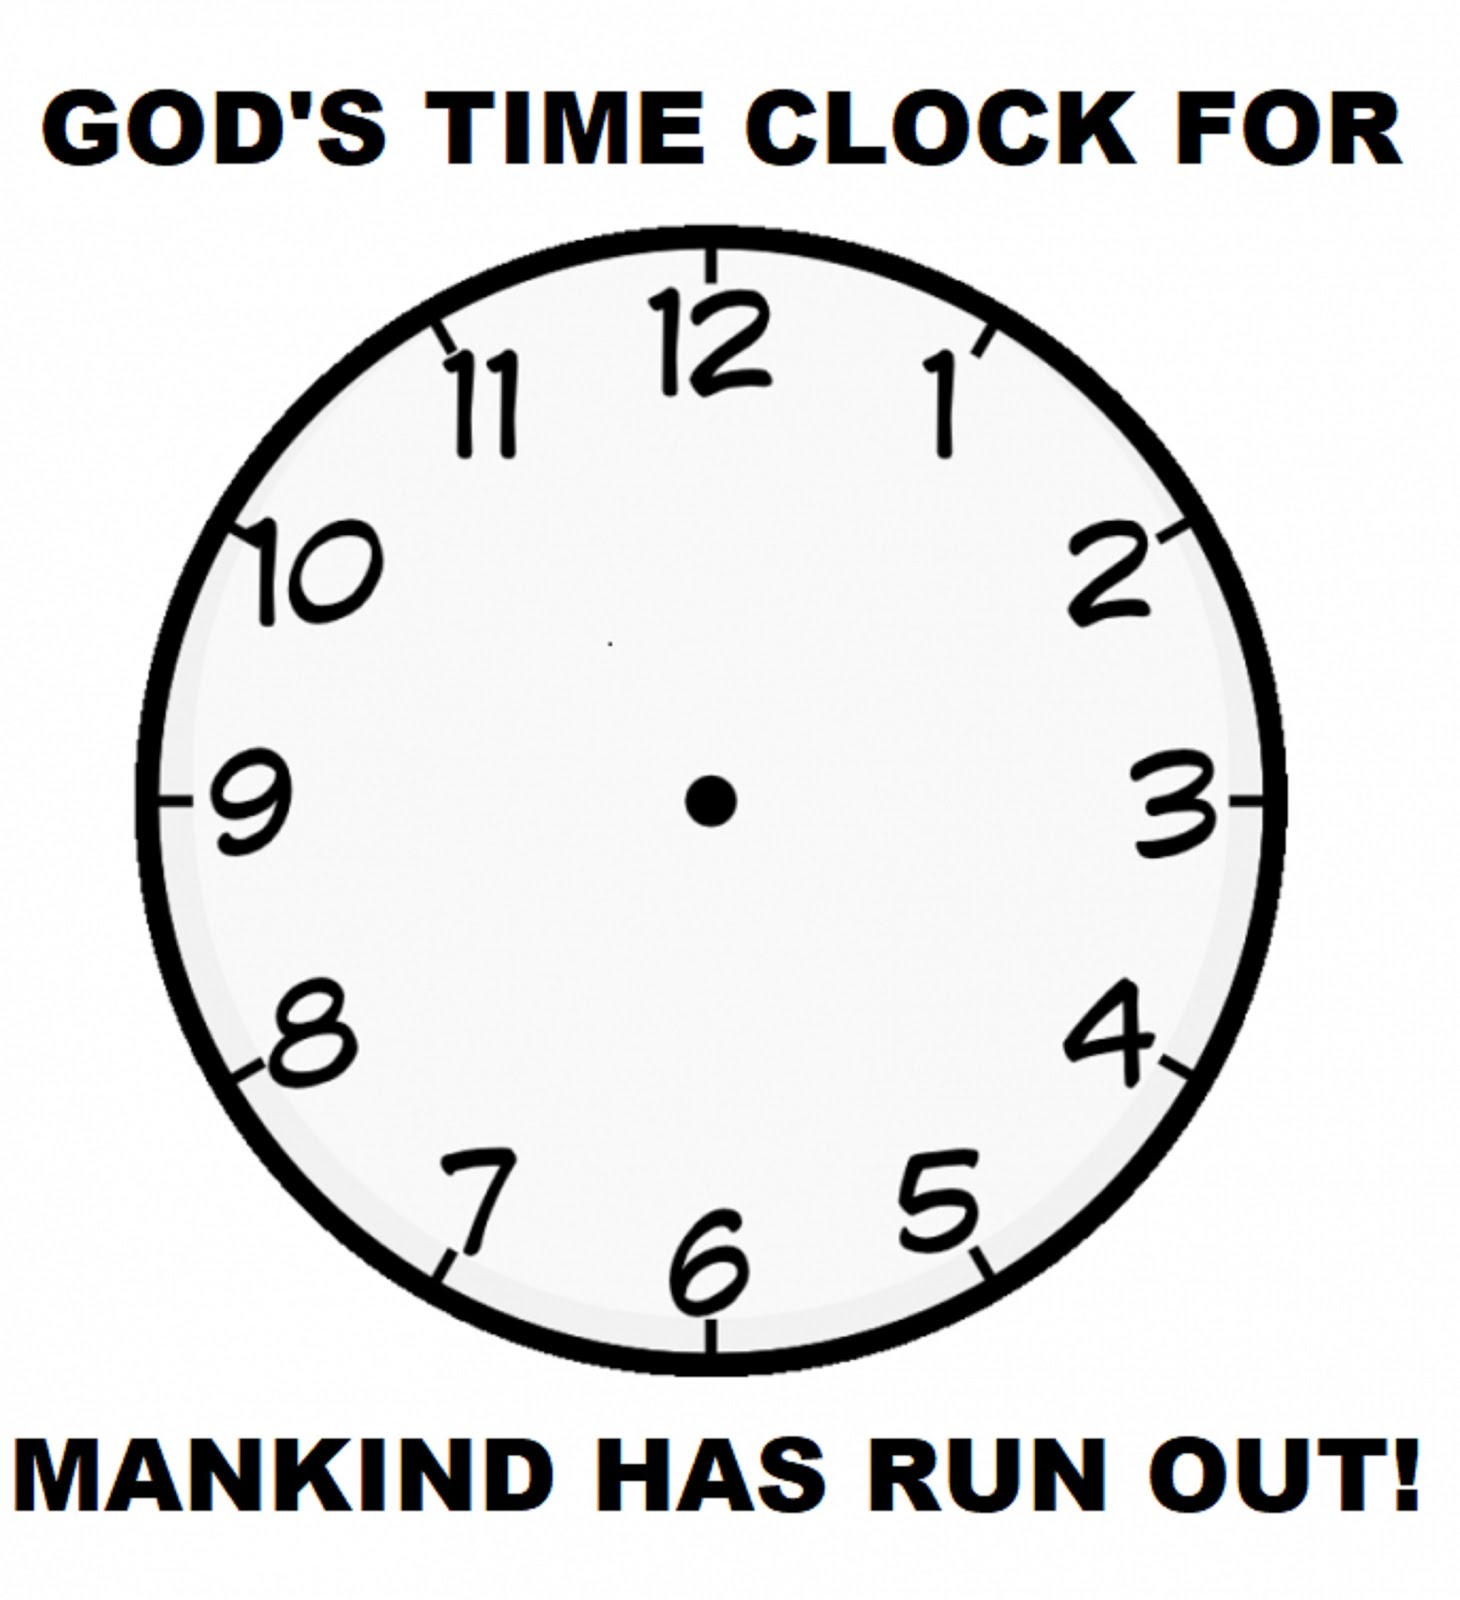 GOD'S TIME CLOCK FOR MANKIND HAS RUN OUT!